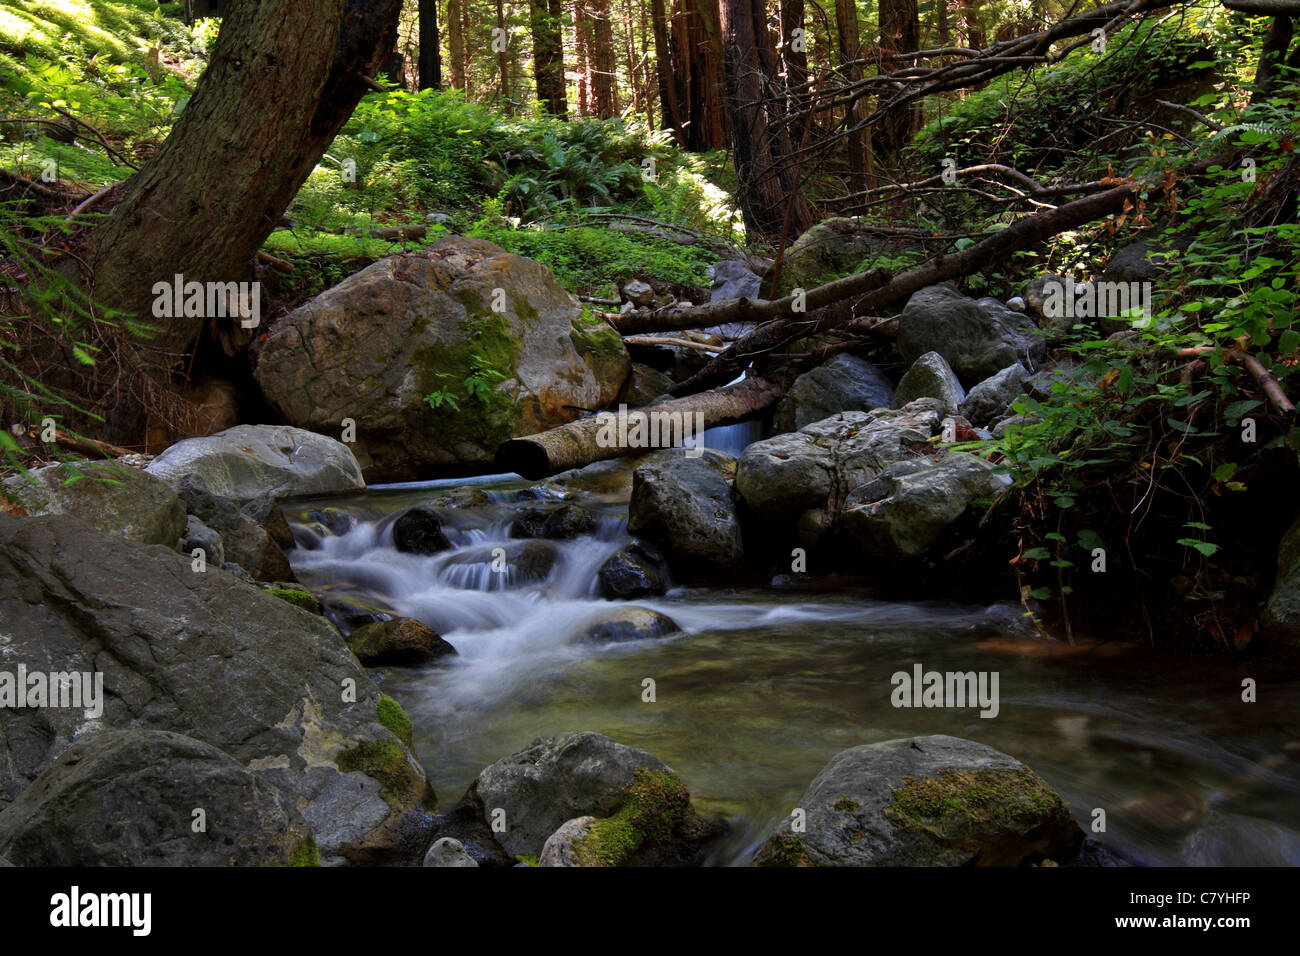 Lime Kiln creek flows through the redwood forest of Lime Kiln State Park. Stock Photo